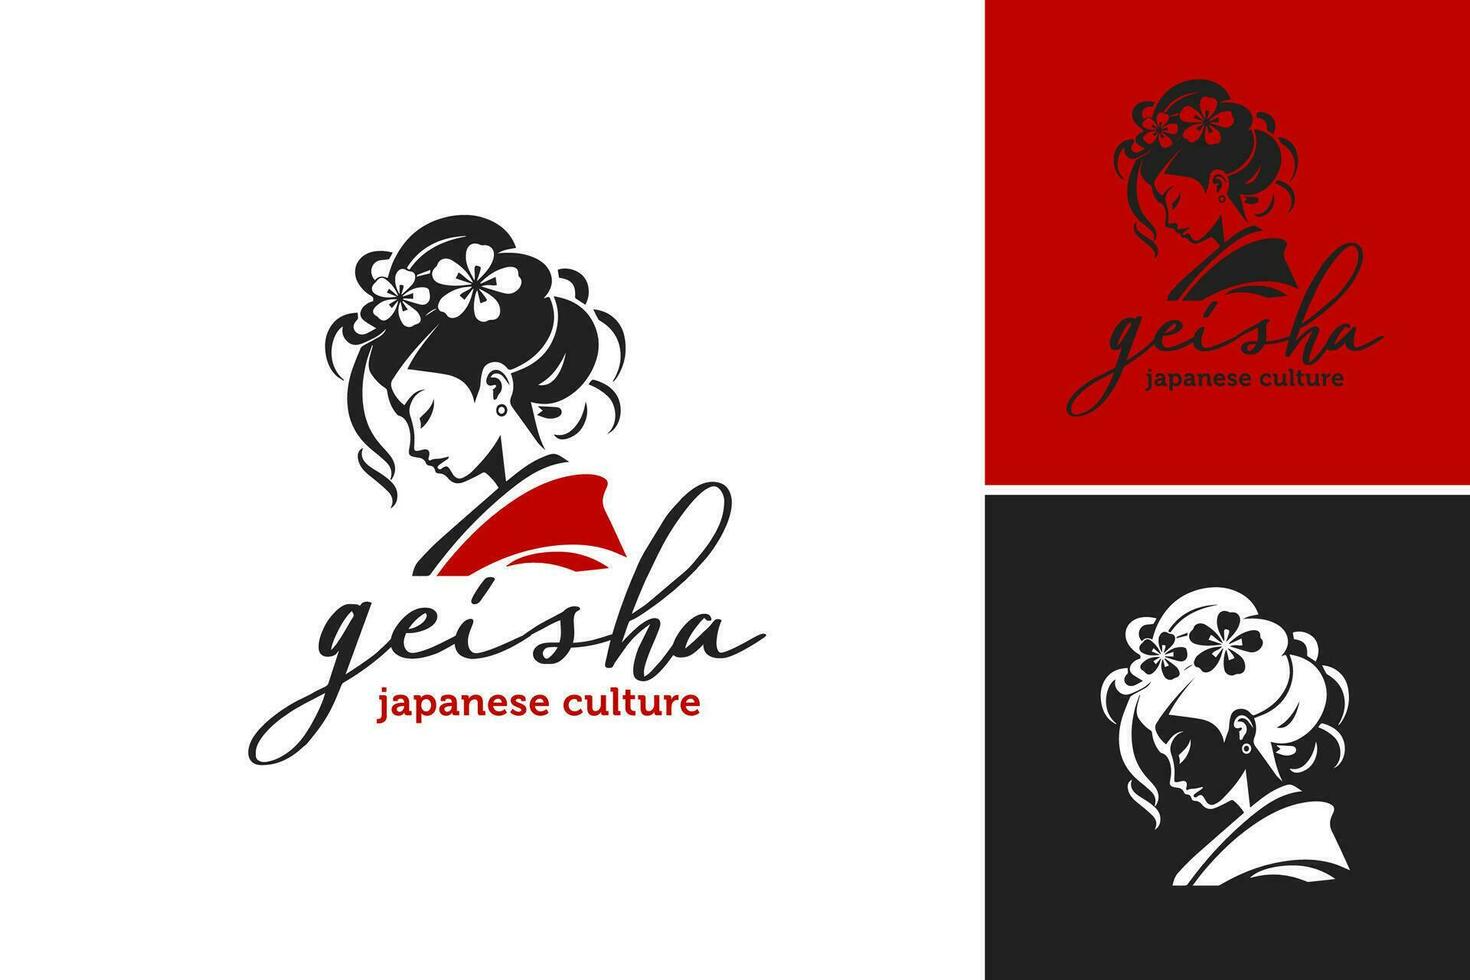 Geisha Japanese Culture Logo is a design asset related to the traditional Japanese art of geisha. It is suitable for branding, merchandise, or any project that involves promoting vector